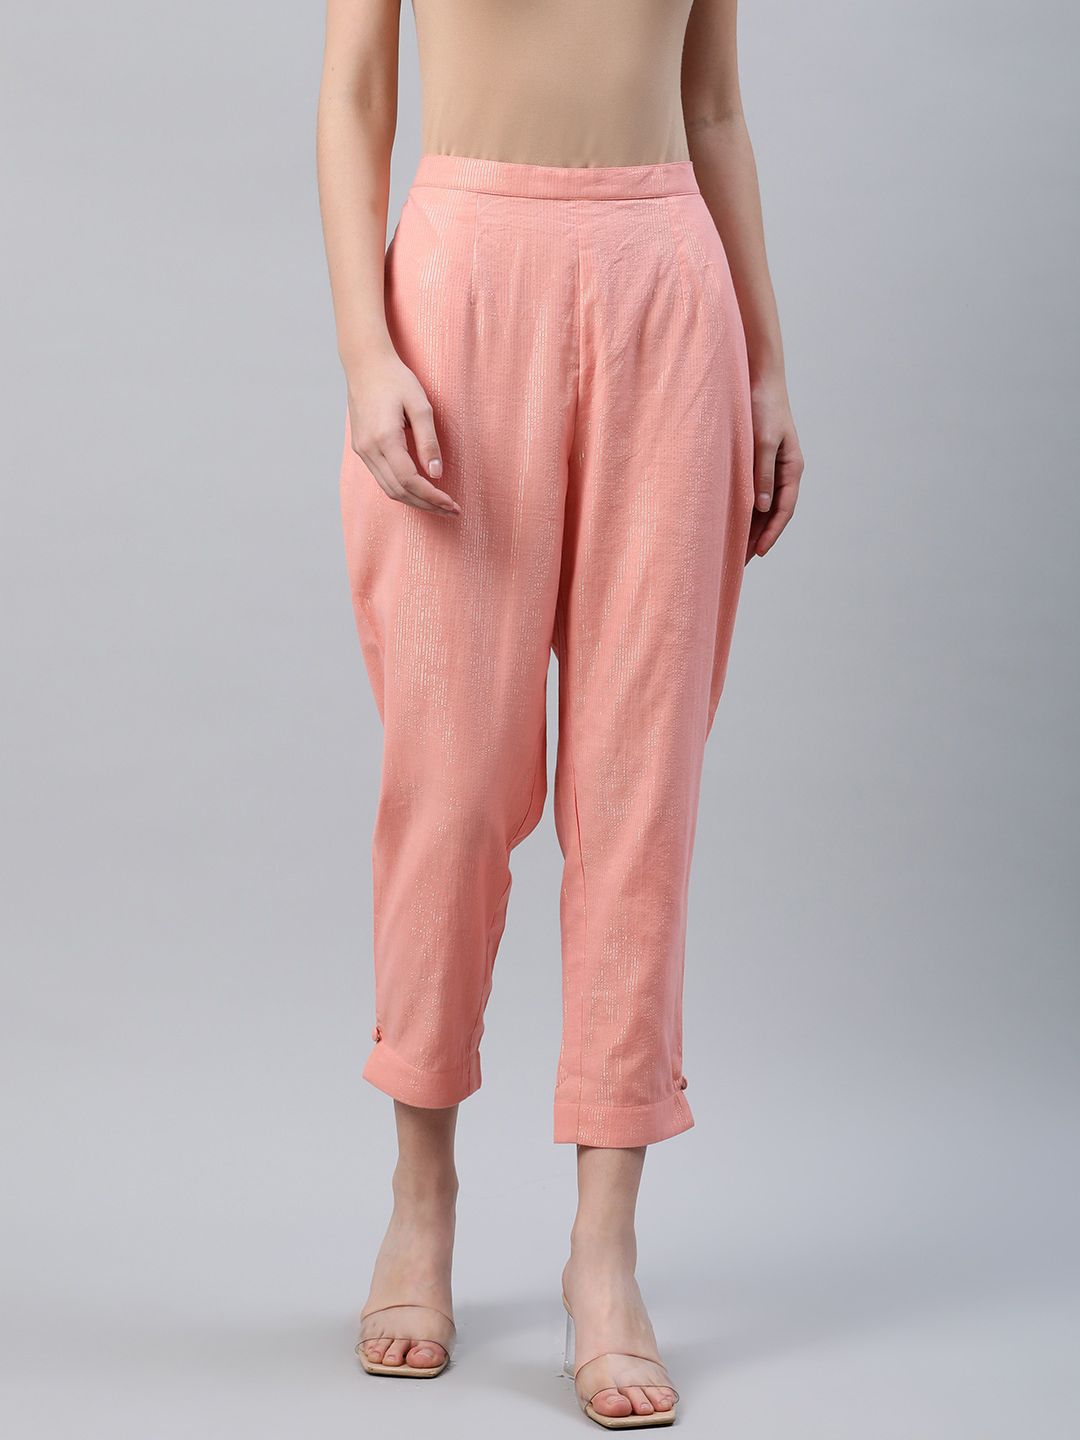 Libas Women Peach-Coloured Striped Cotton Trousers Price in India